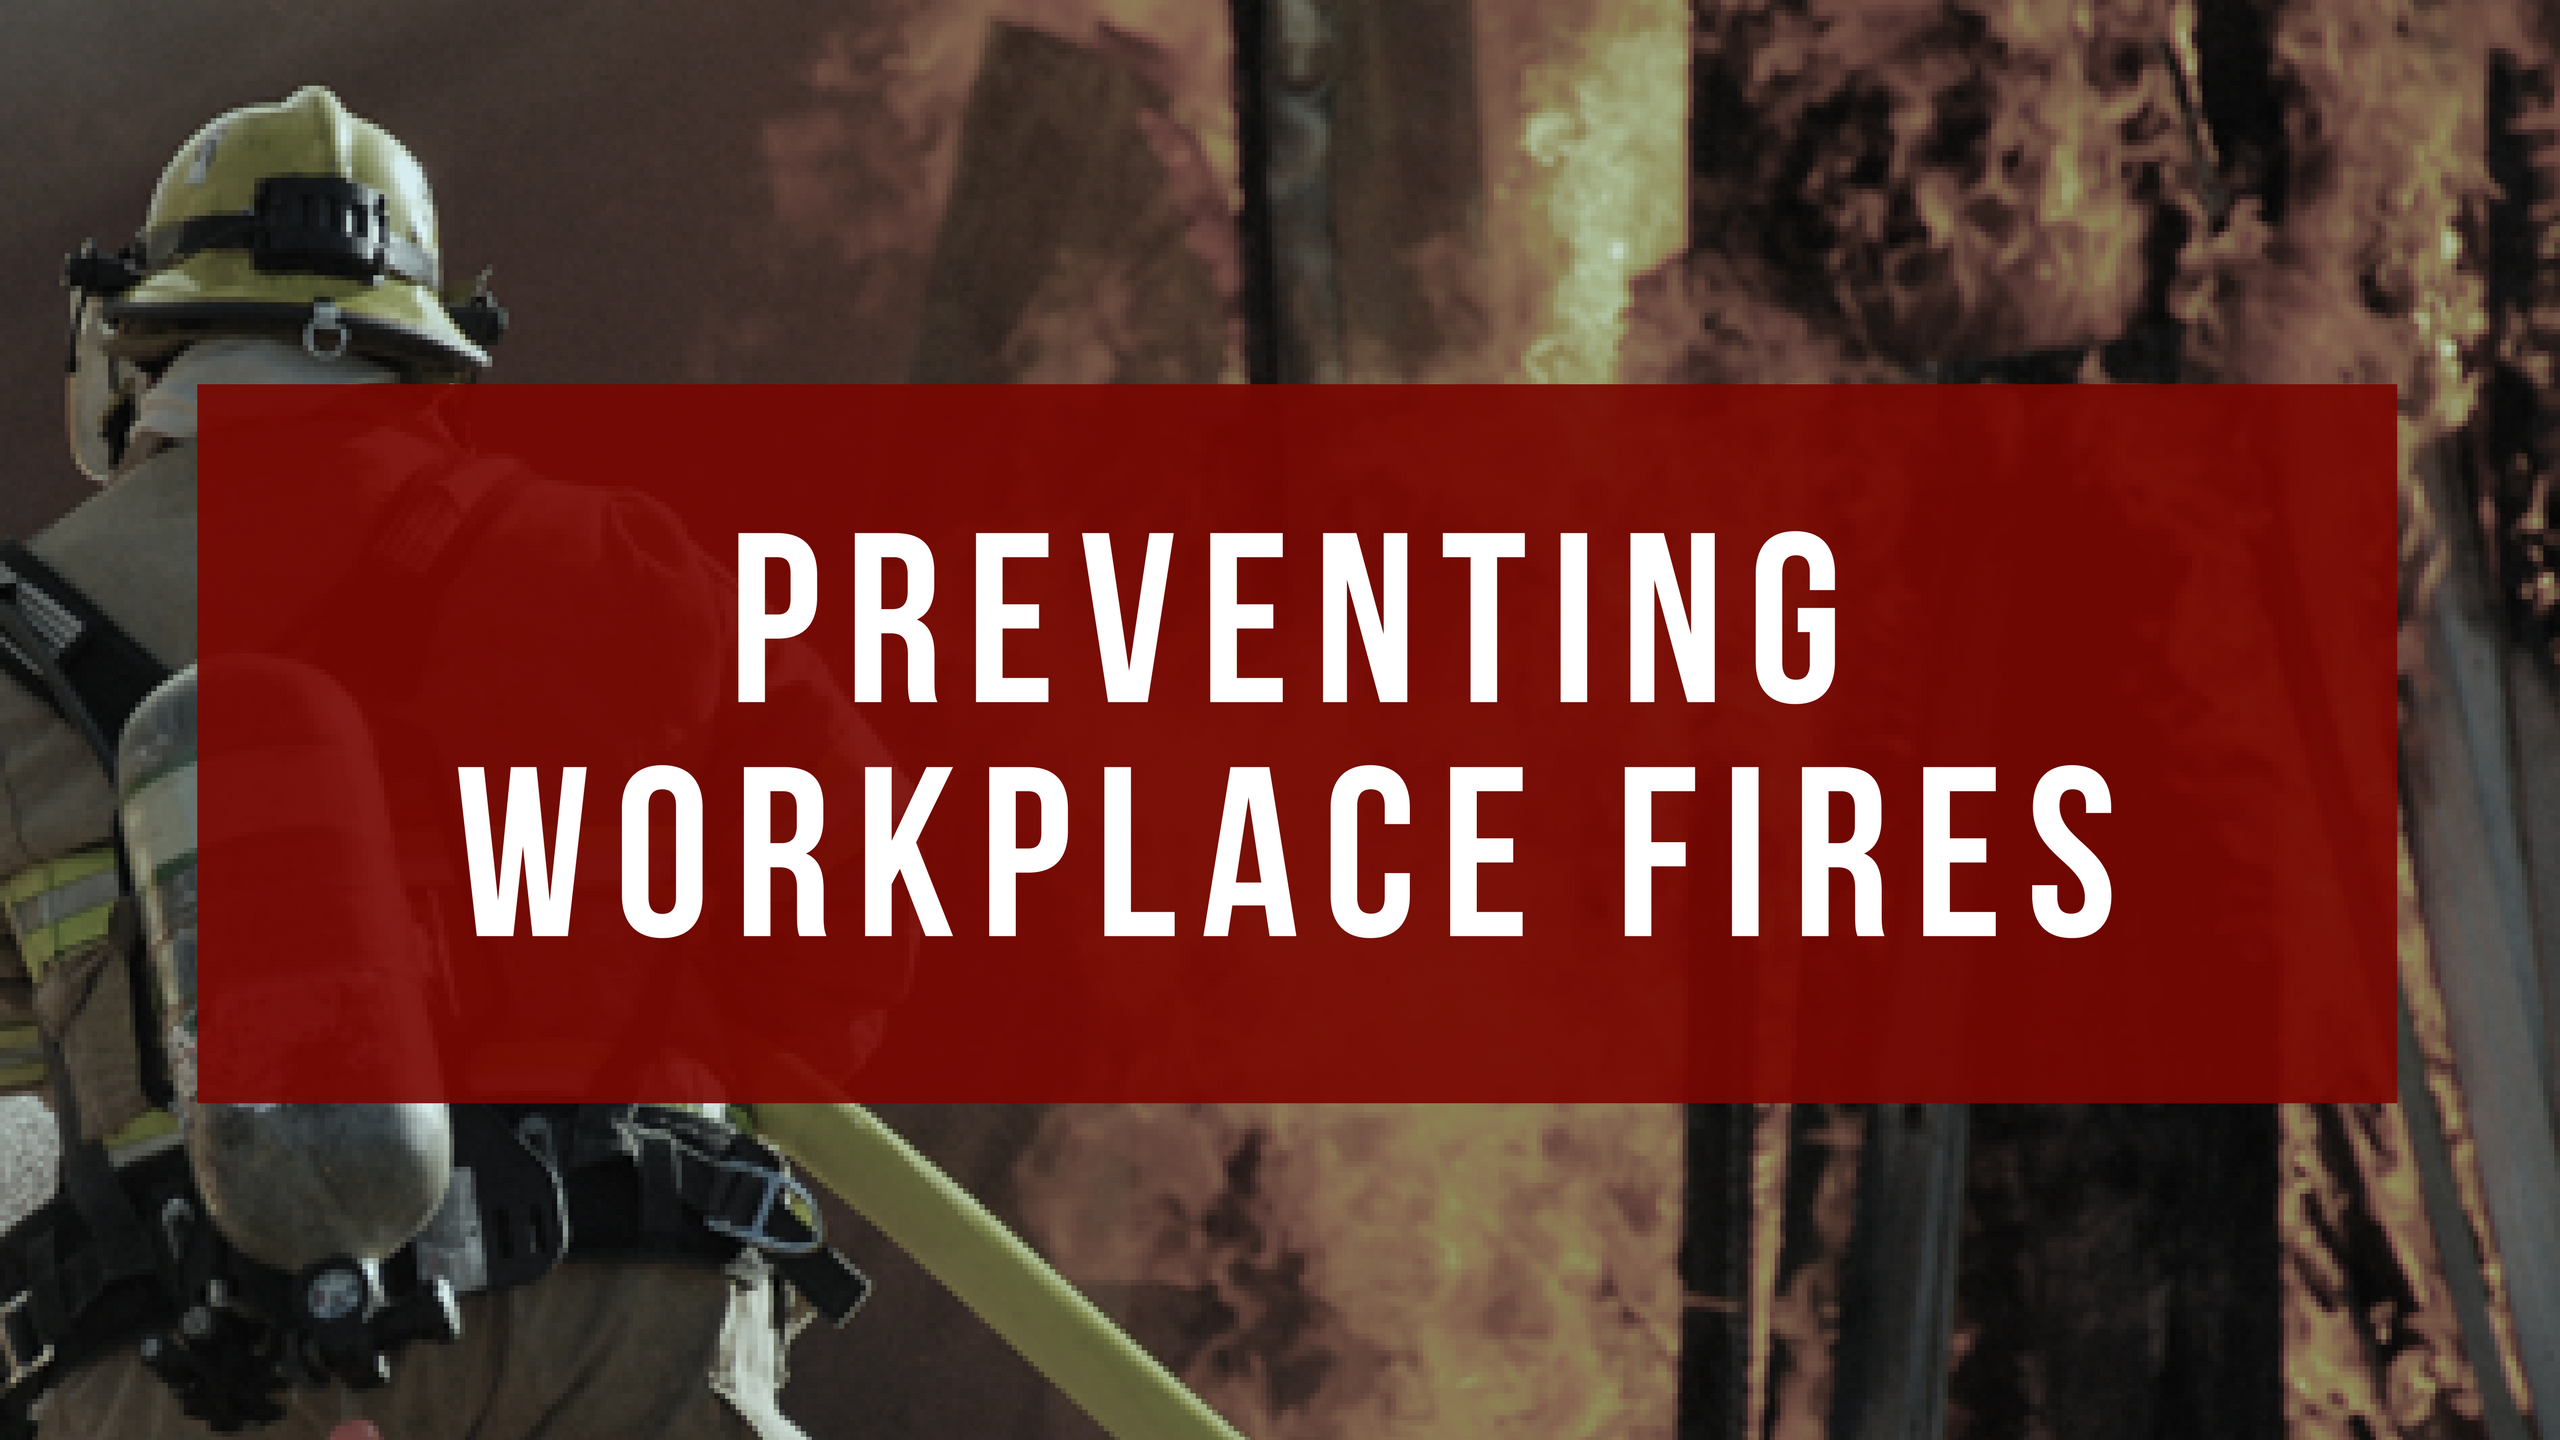 MAY - Guest Blog - Roofing Risk Adv - Preventing Workplace Fires - 2018